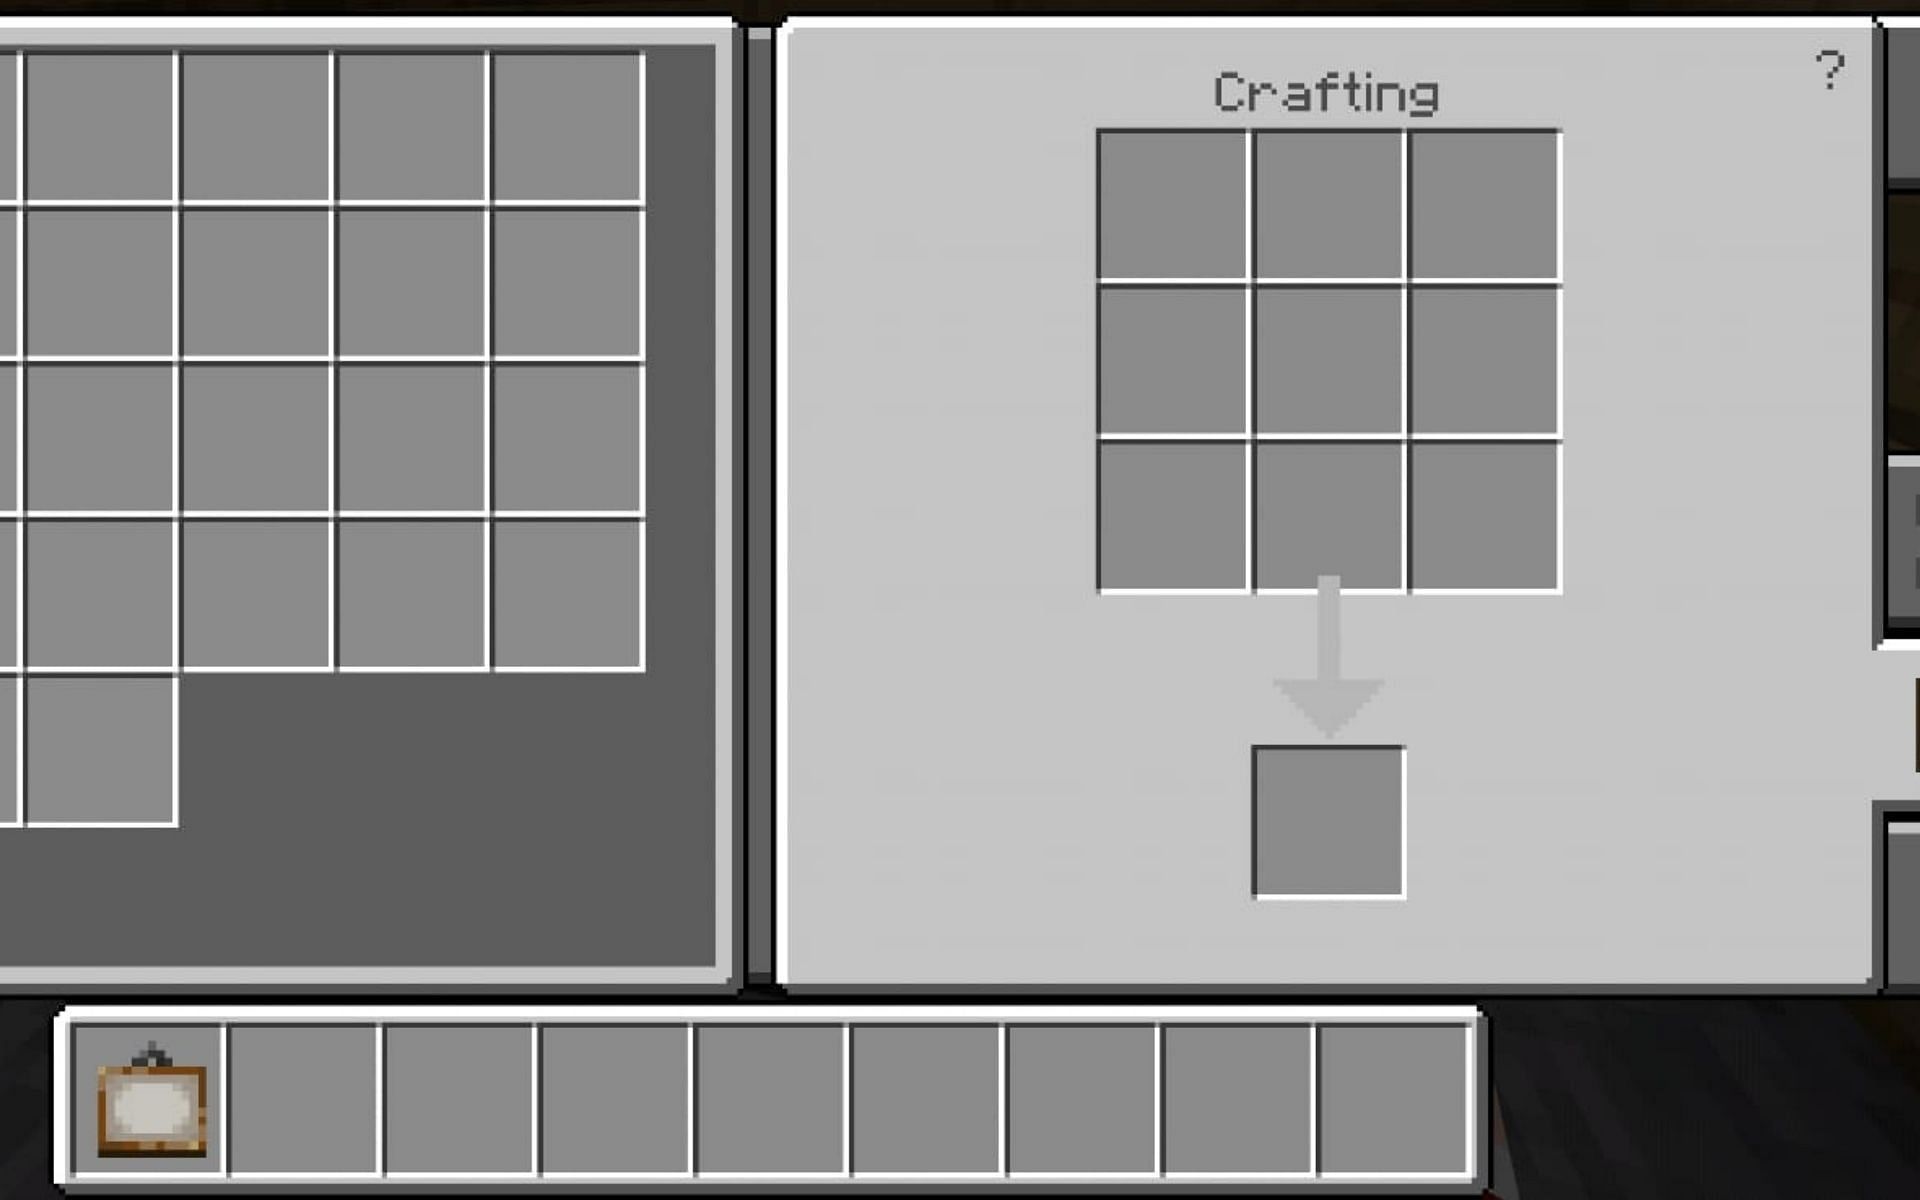 Painting is in the hotbar (Image via Minecraft)